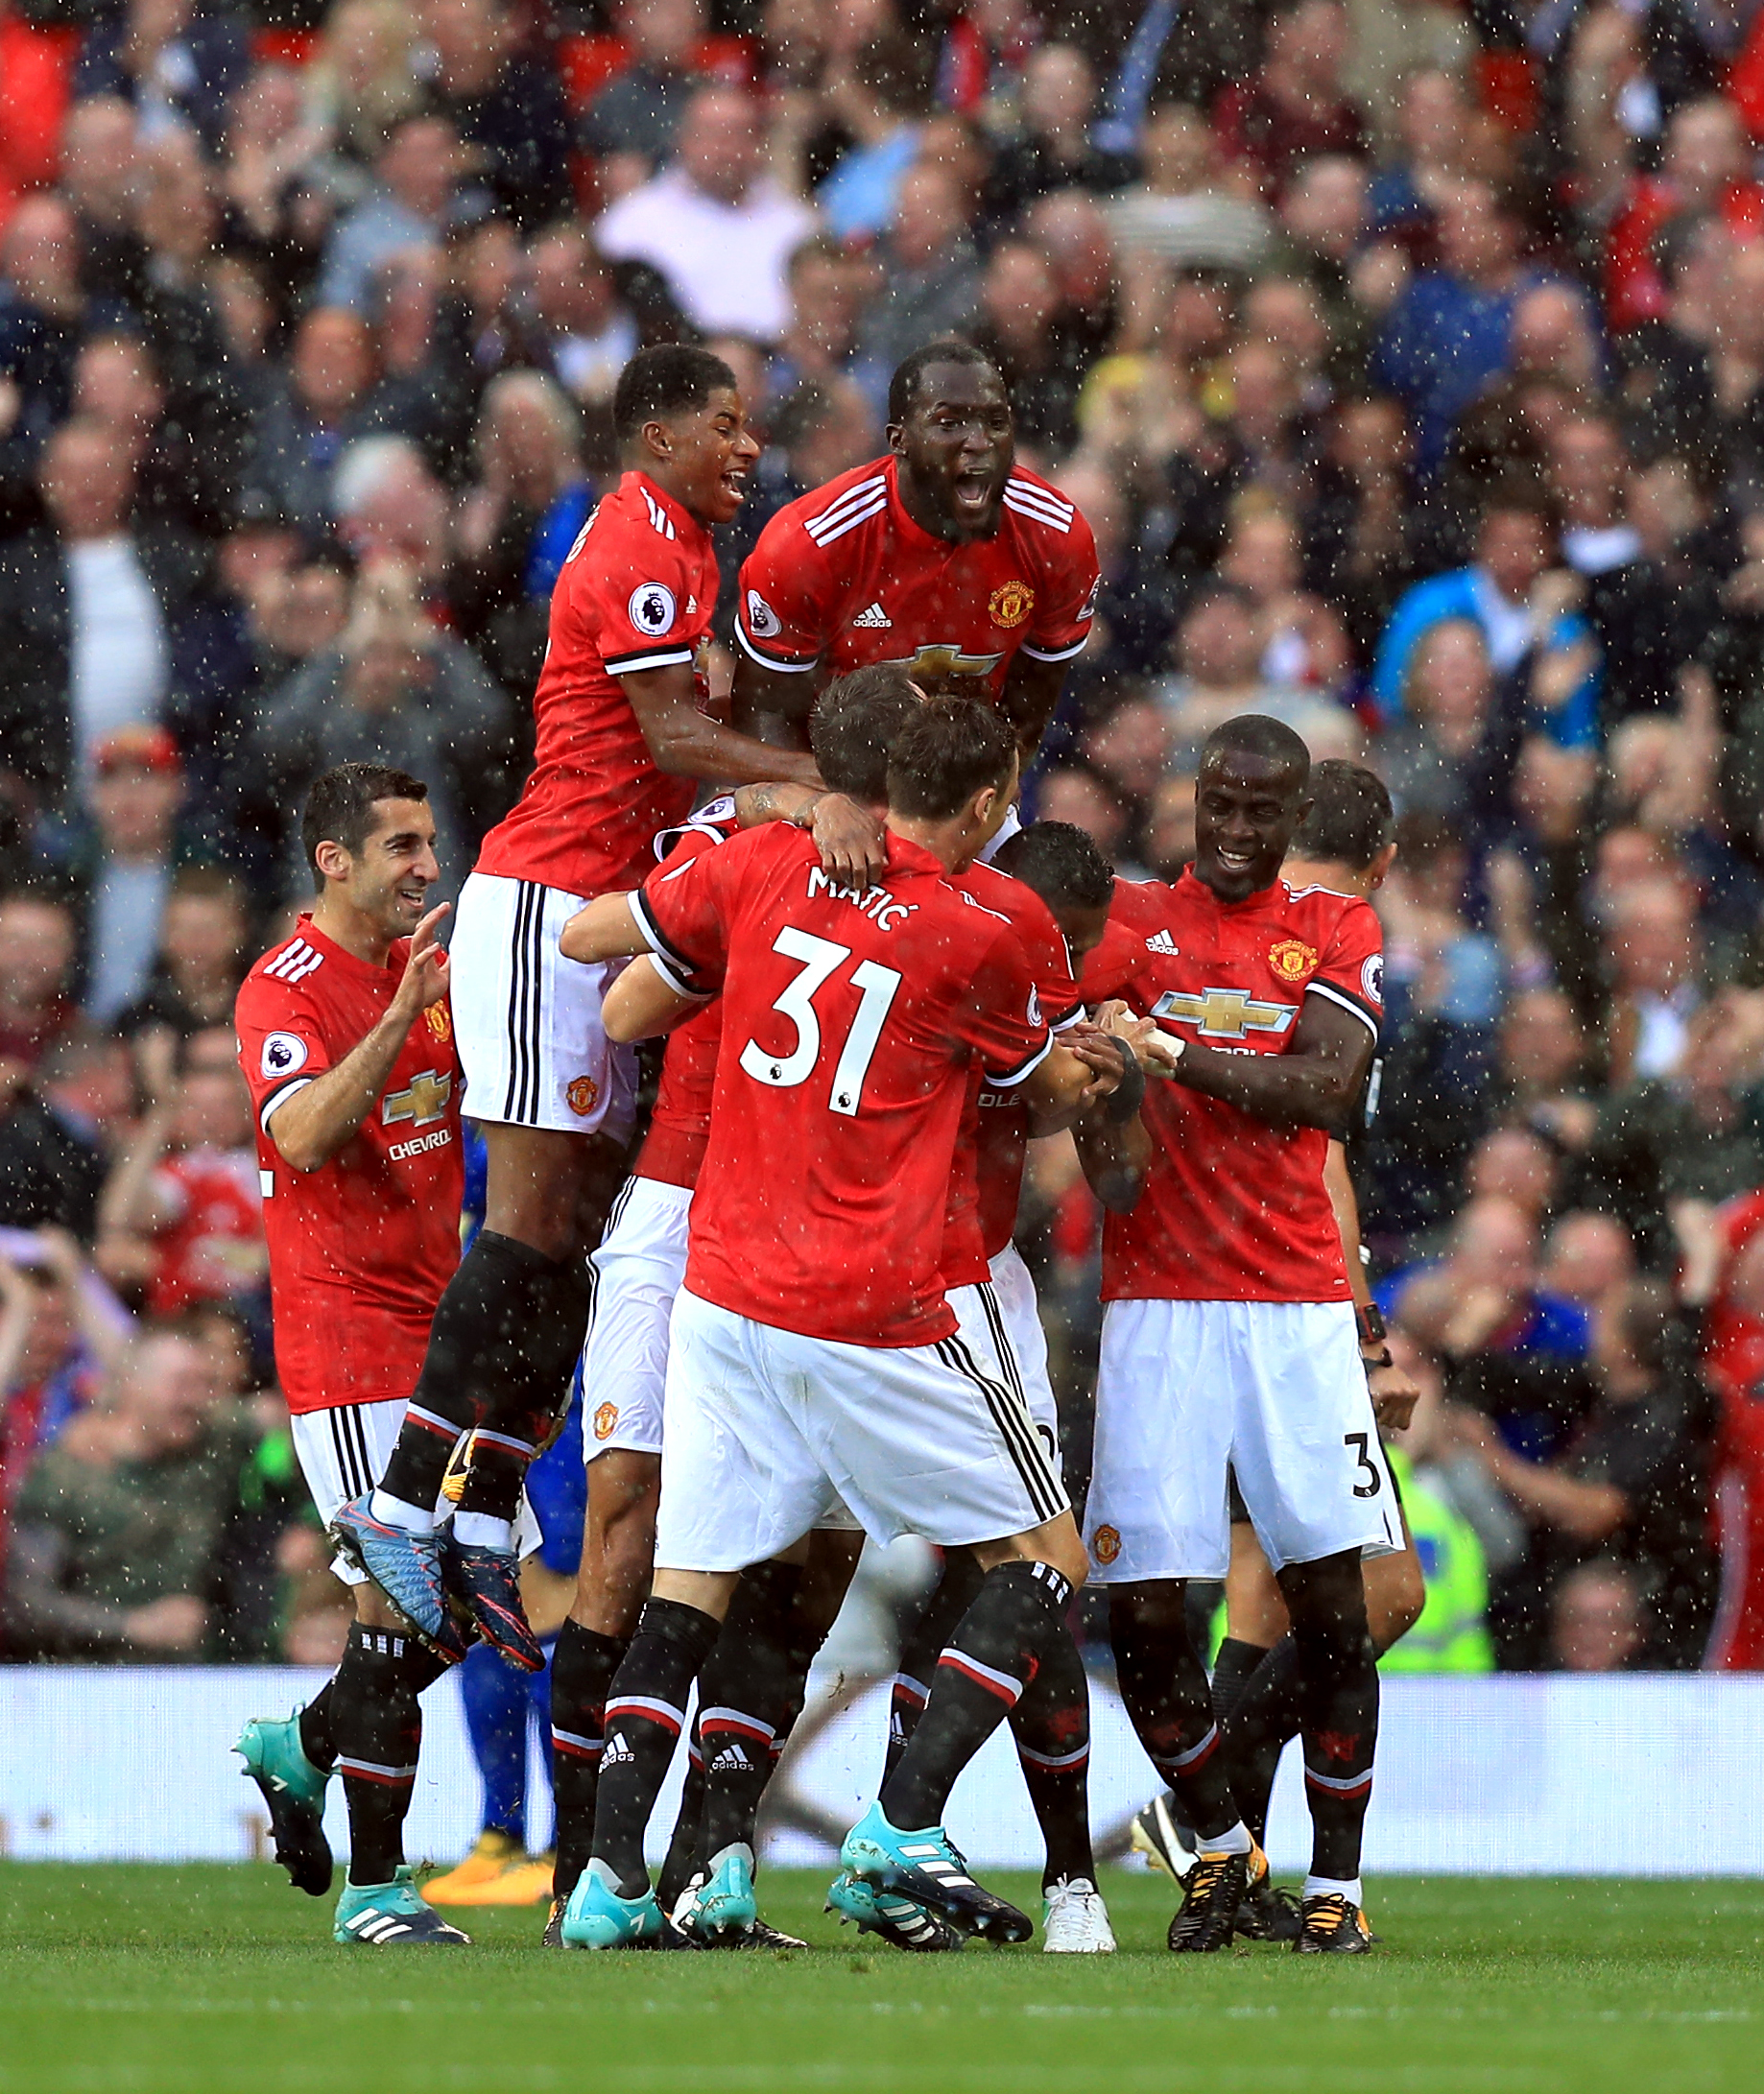 Manchester United's Antonio Valencia celebrates scoring his side's first goal of the game with his team-mates